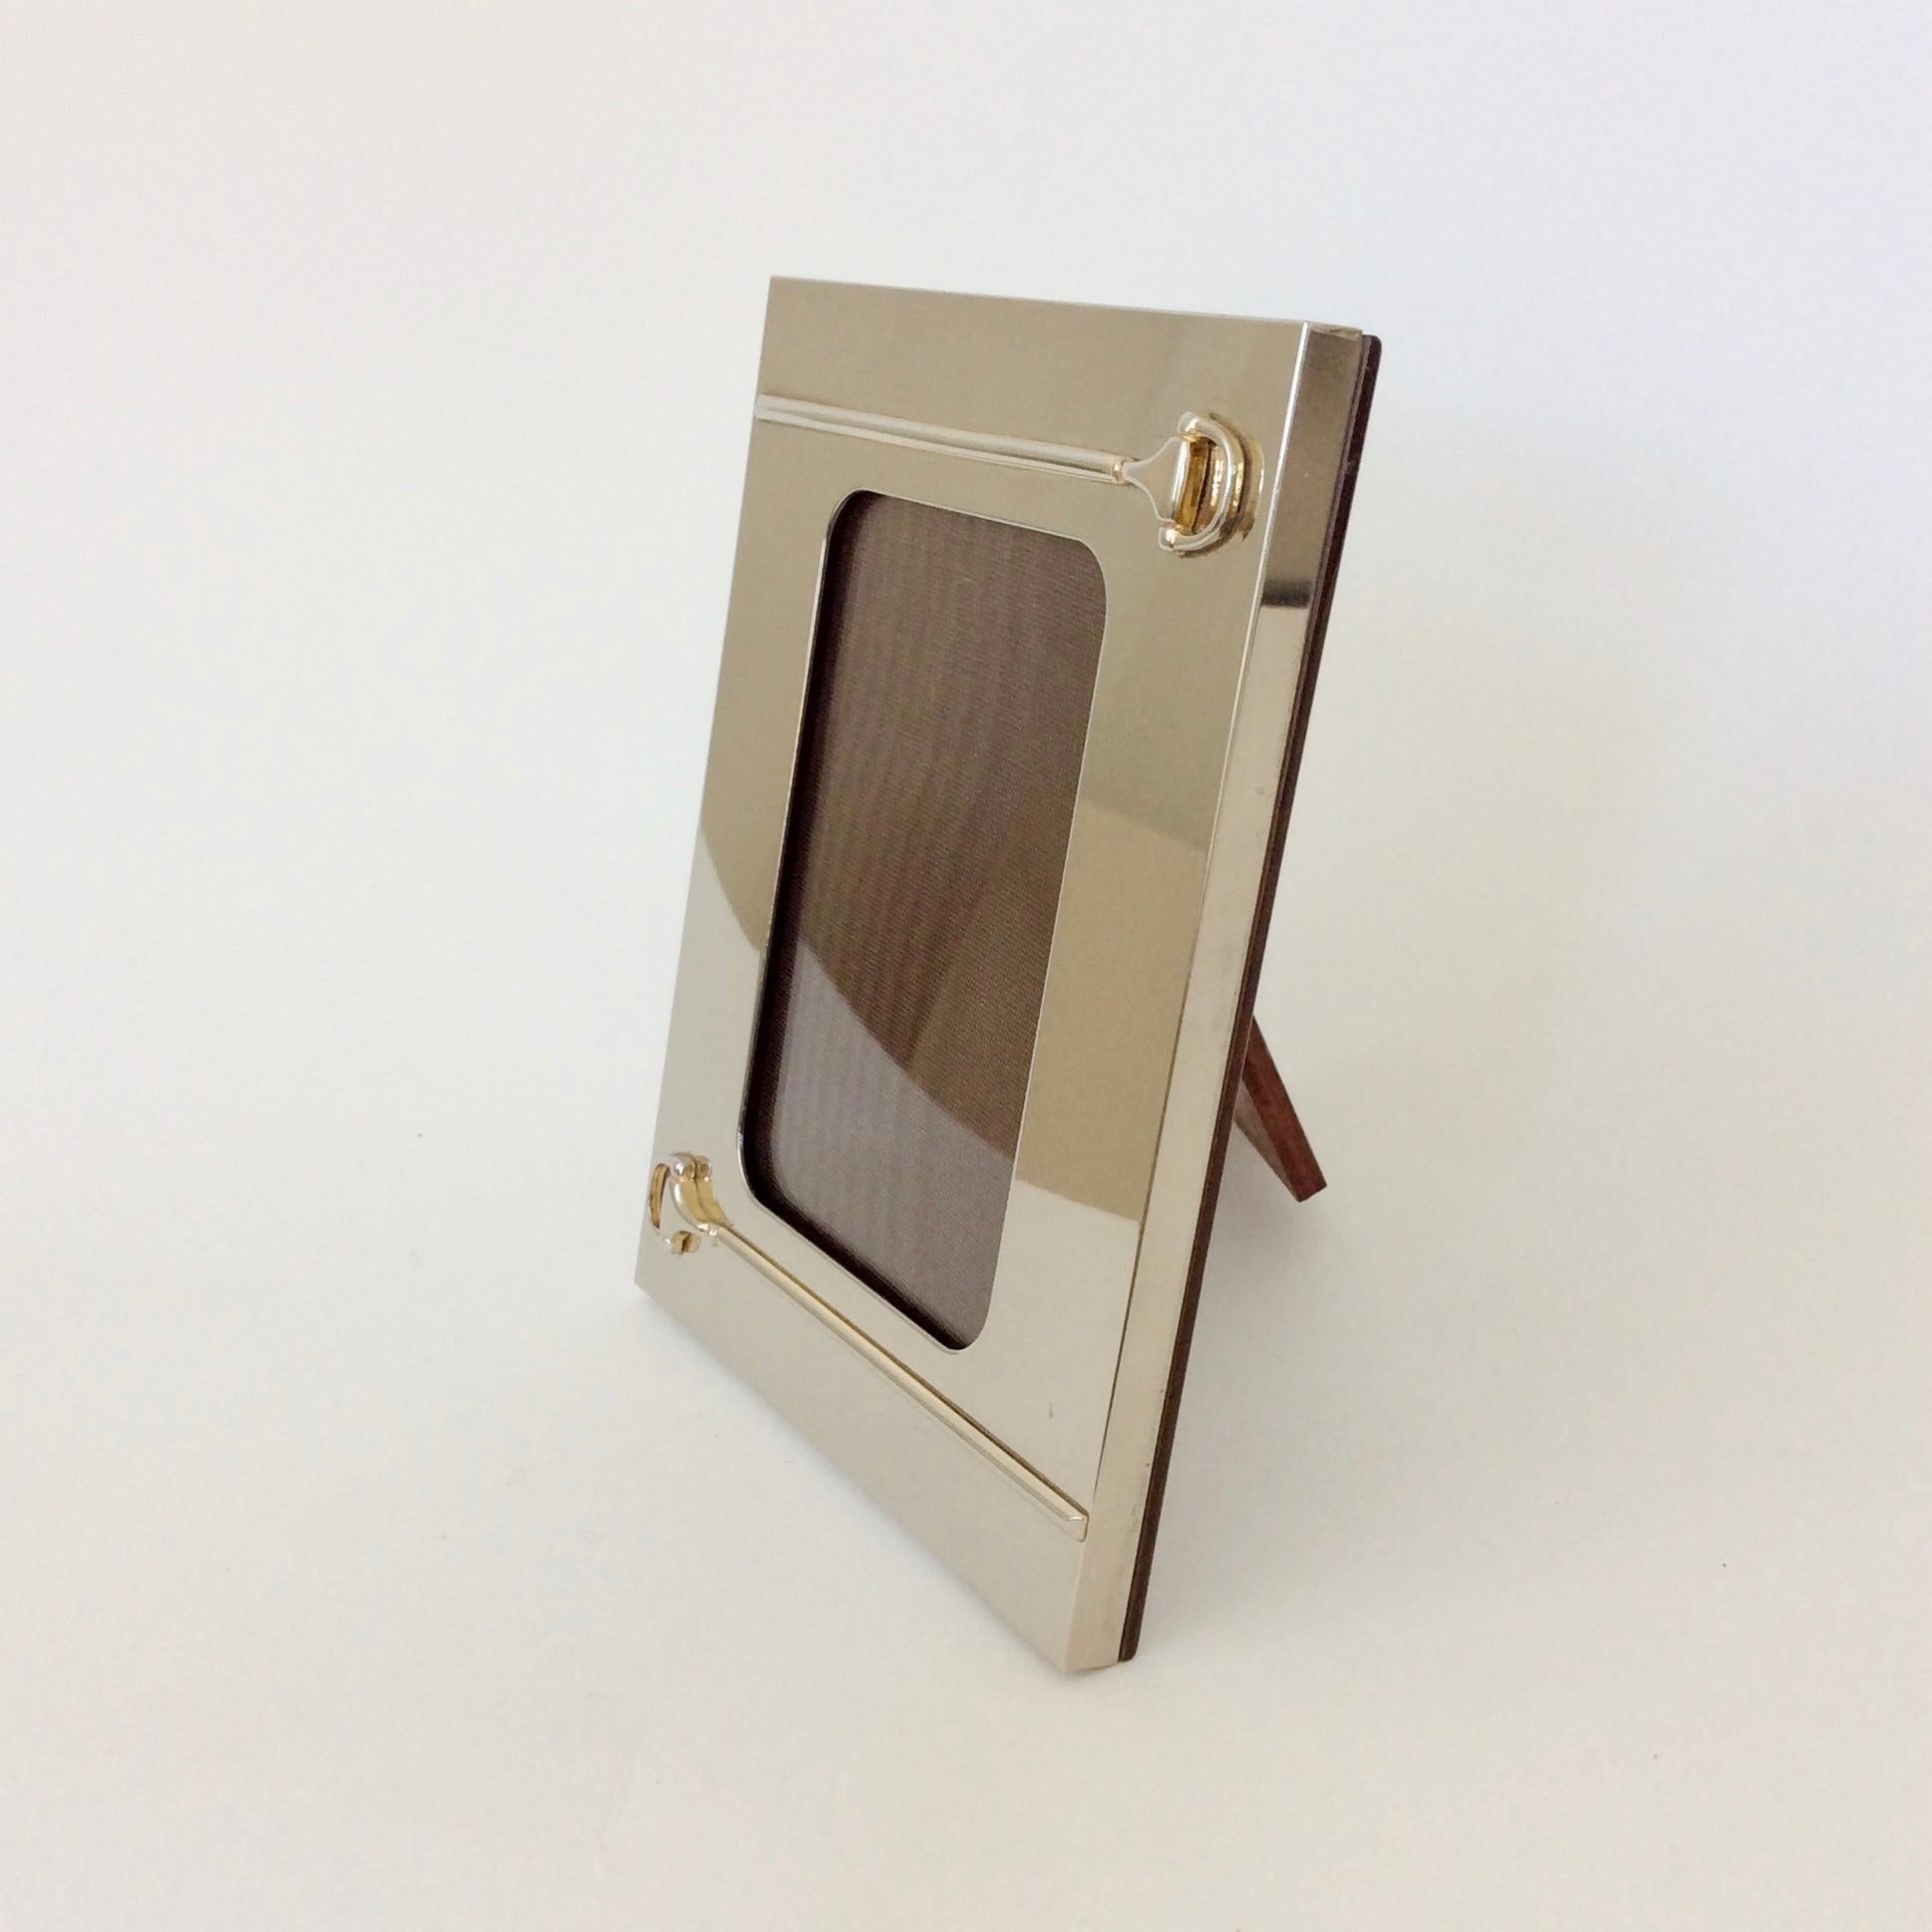 Elegant Gucci picture frame with stirrup motif, circa 1970, Italy.
Silver plate brass, wood back.
Dimensions: 14 cm h, 10 cm W, 10 cm D.
Good condition.
We ship worldwide.
All purchases are covered by our Buyer Protection Guarantee.
This item can be